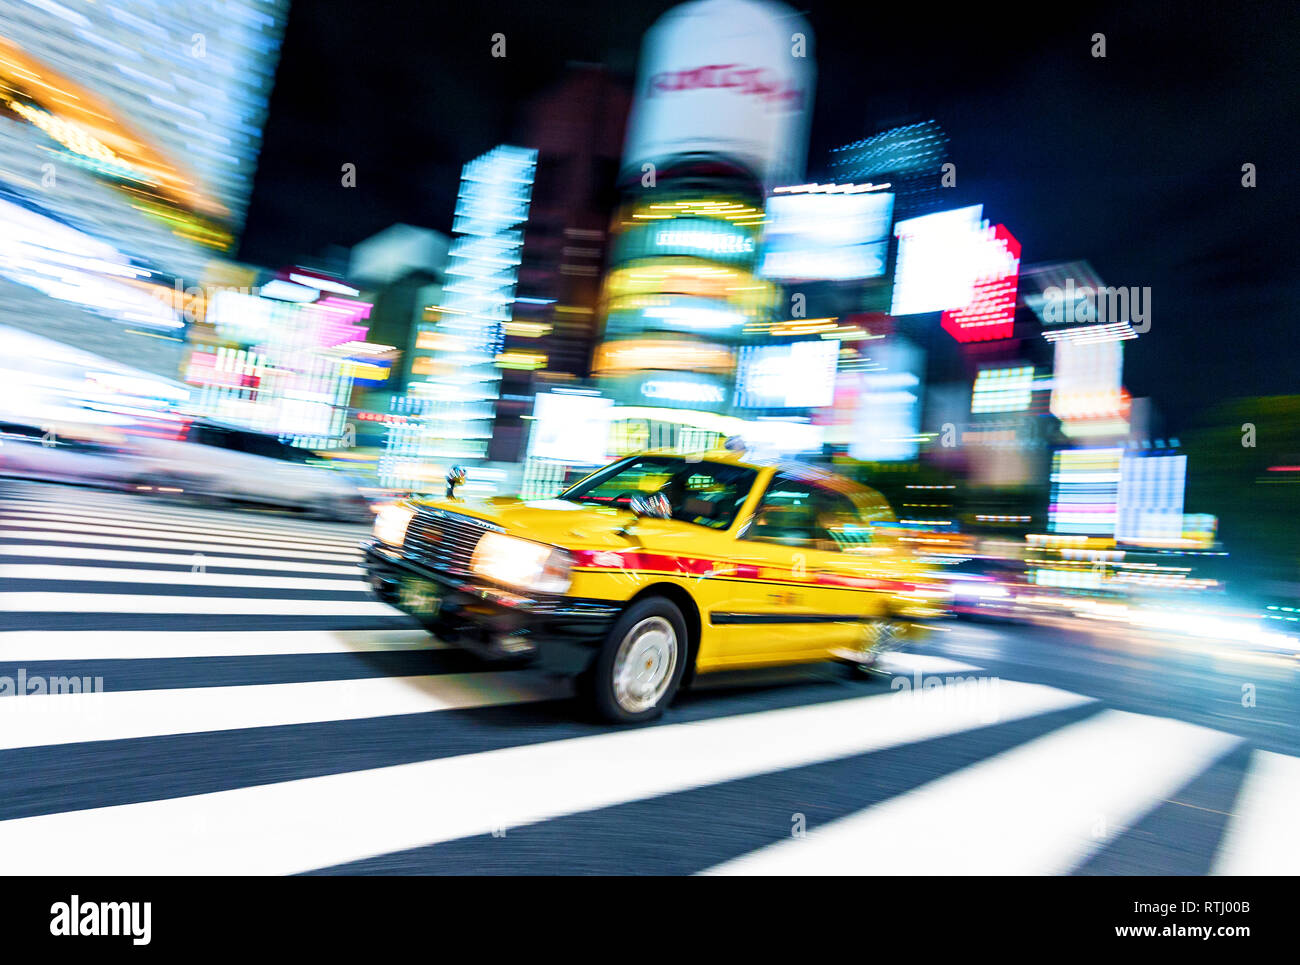 Tokyo Taxi Ginza Crossing Japan Stock Photo